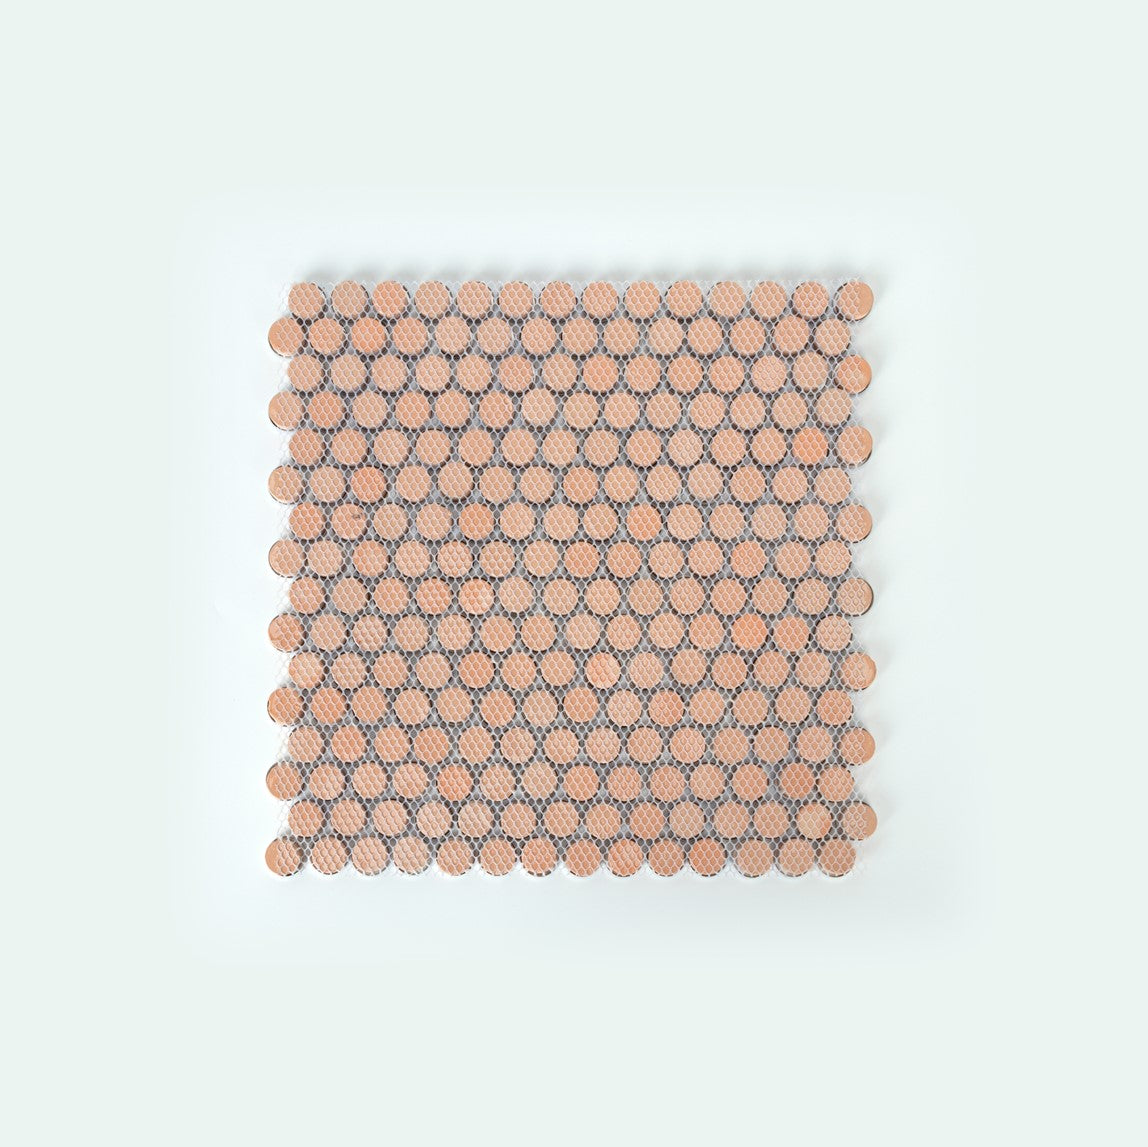 Twilight 0.8" Aluminum Penny Round Mosaic Wall Tile - Patterned - 10 Square Feet Per Carton